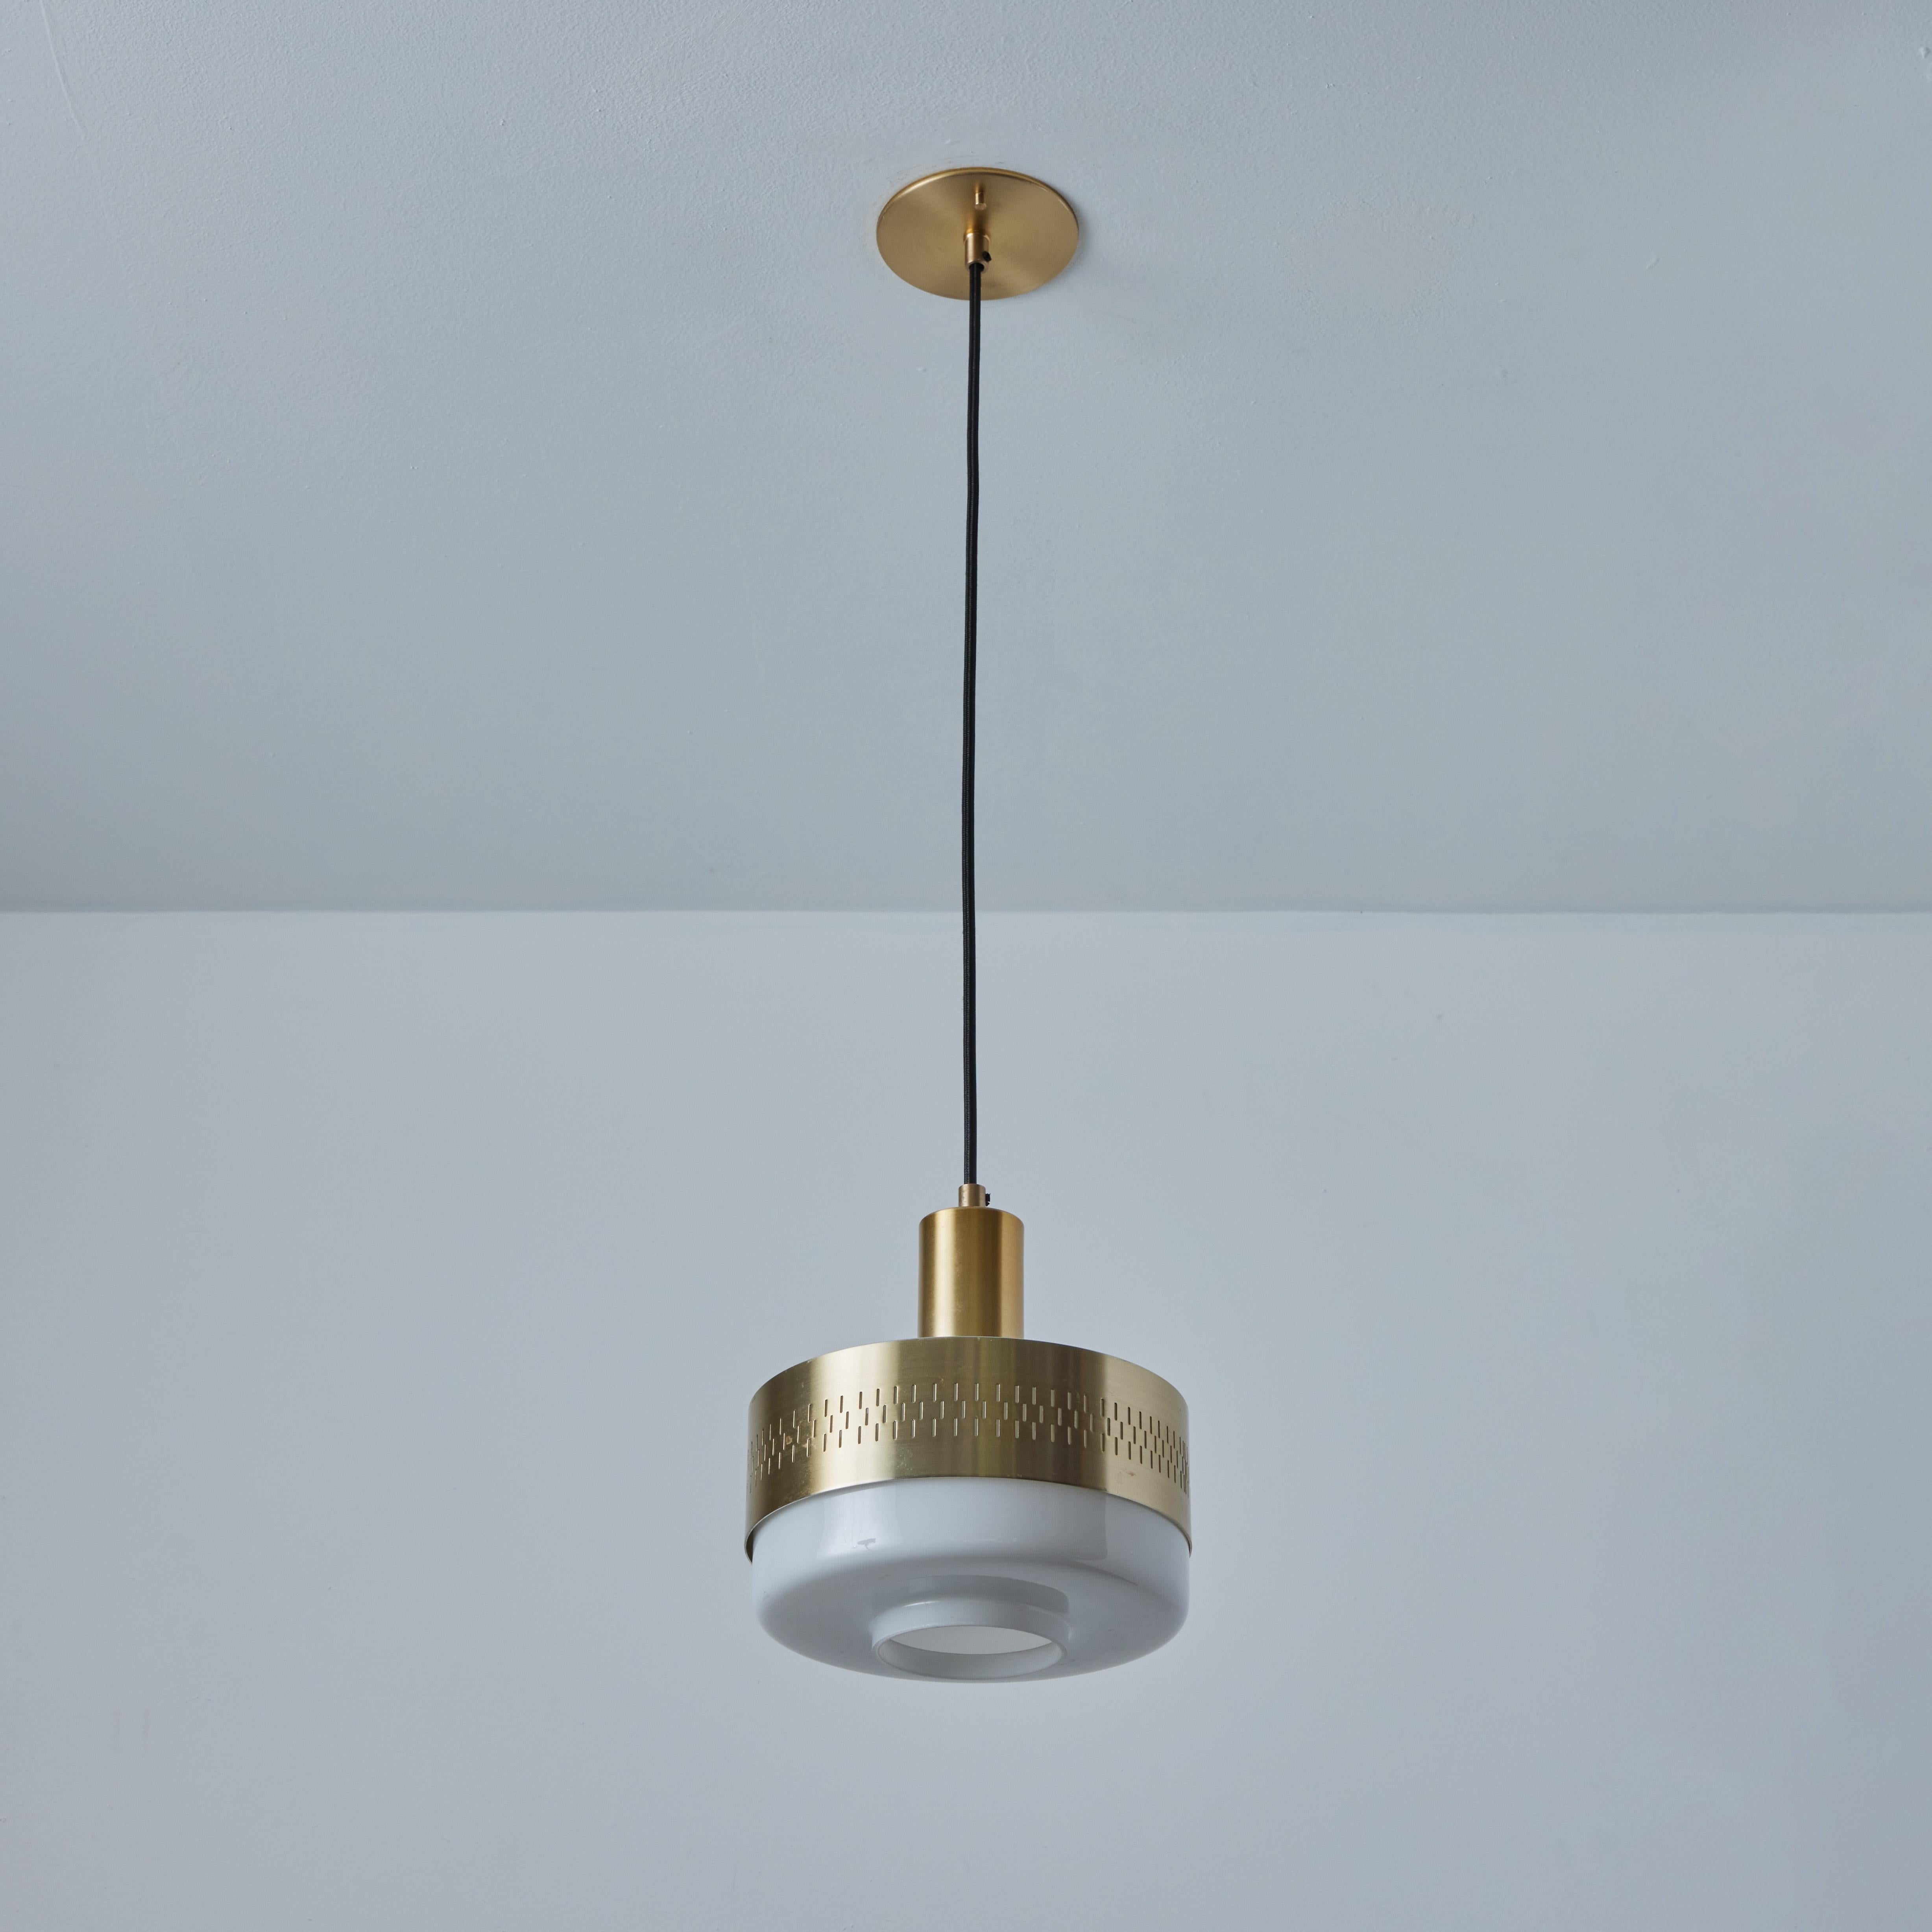 1960s Perforated Brass & Glass Pendant Attributed to Hans-Agne Jakobsson For Sale 5